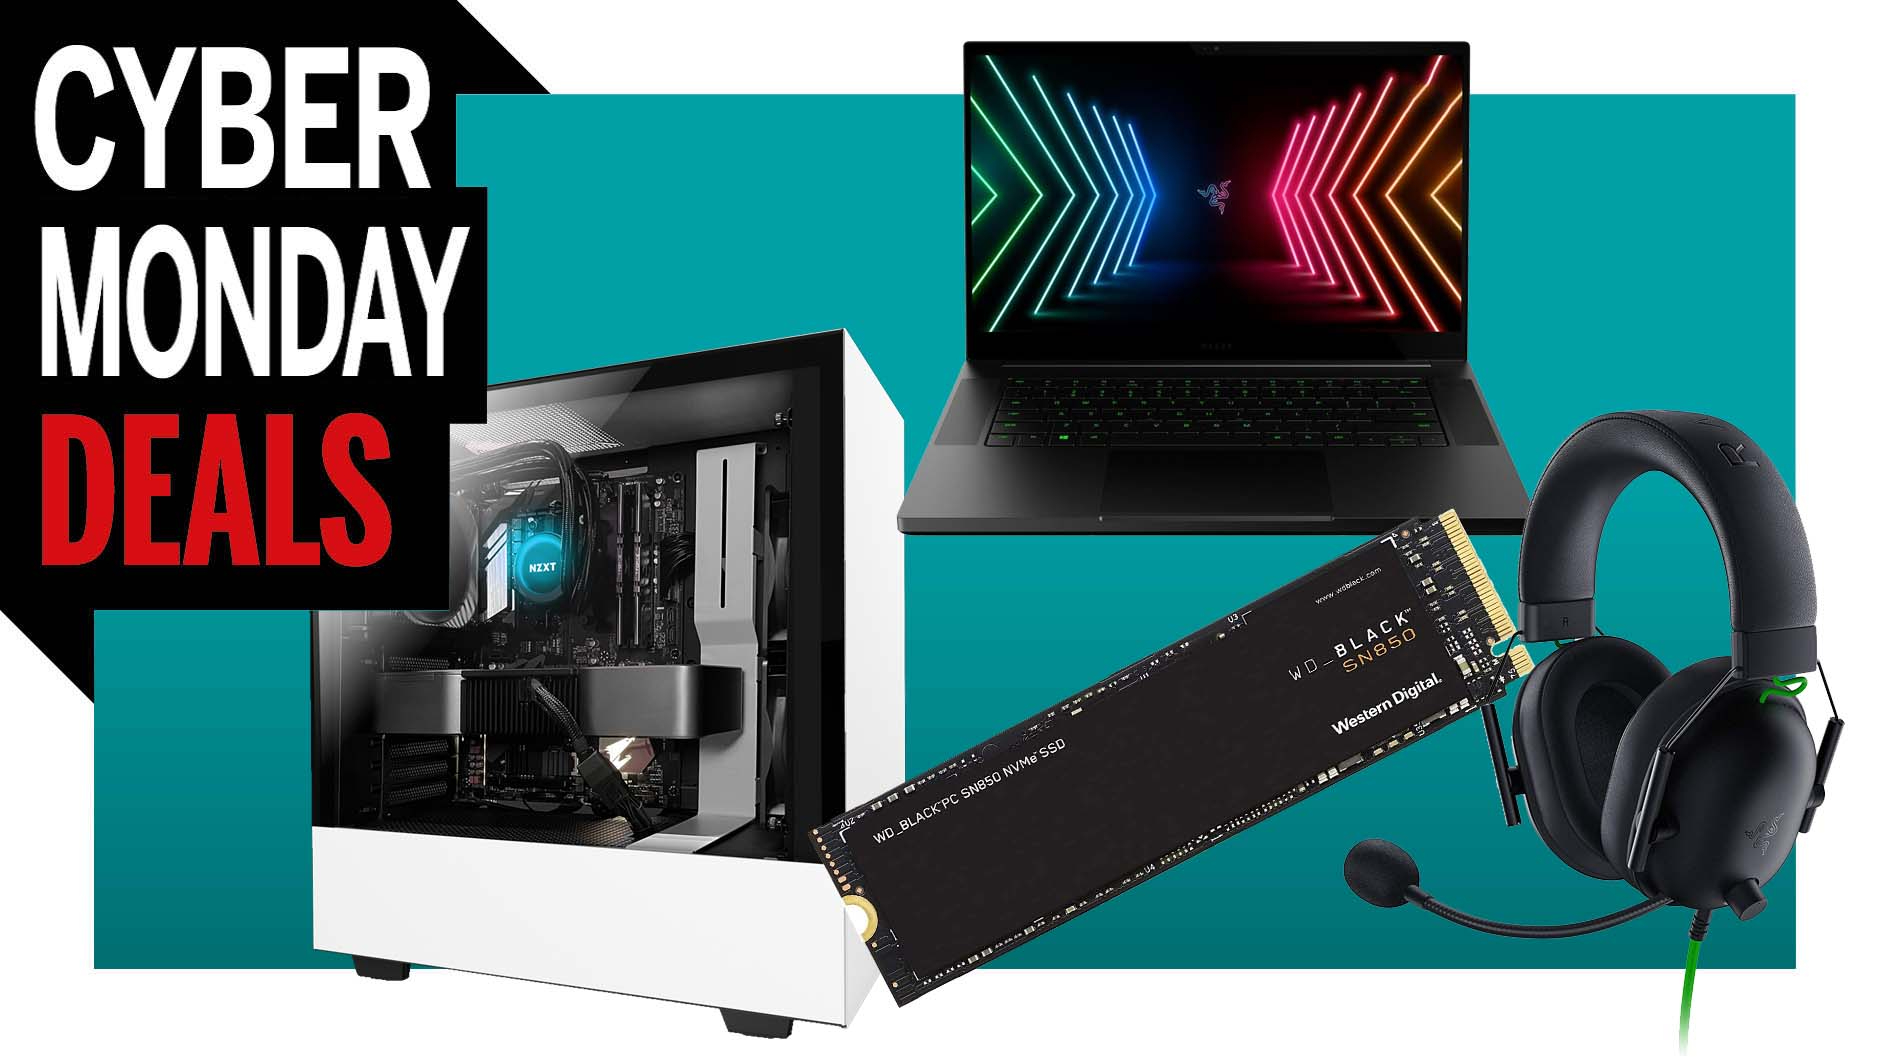 Cyber Monday PC Gaming Deals UK: The Best Deals On PCs, Components, And Peripherals thumbnail